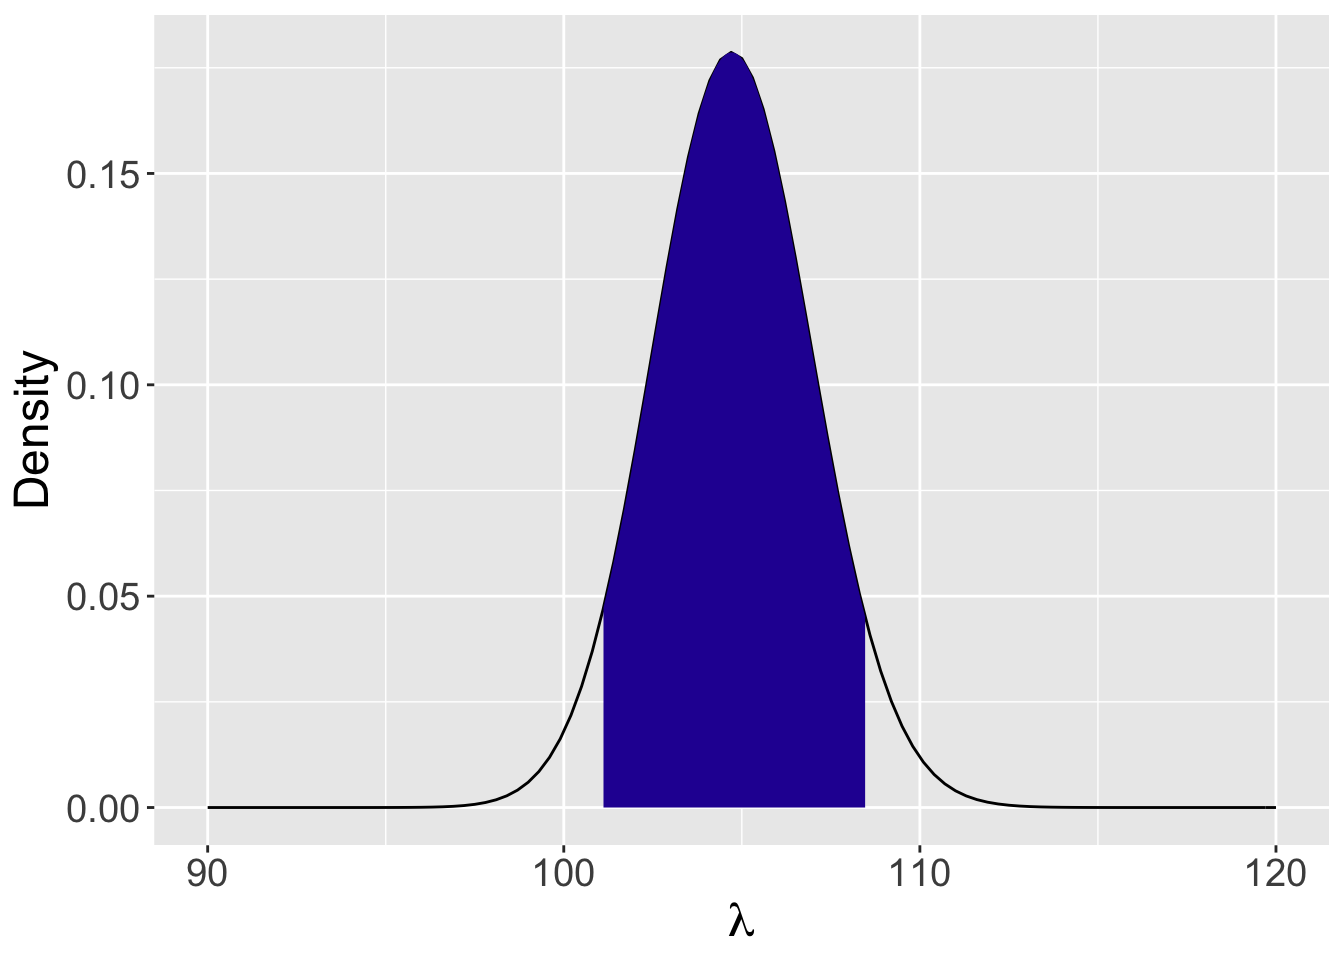 Posterior curve for the mean number of visits $\lambda$ to the website.  The shaded region shows the limits of a 90% interval estimate.